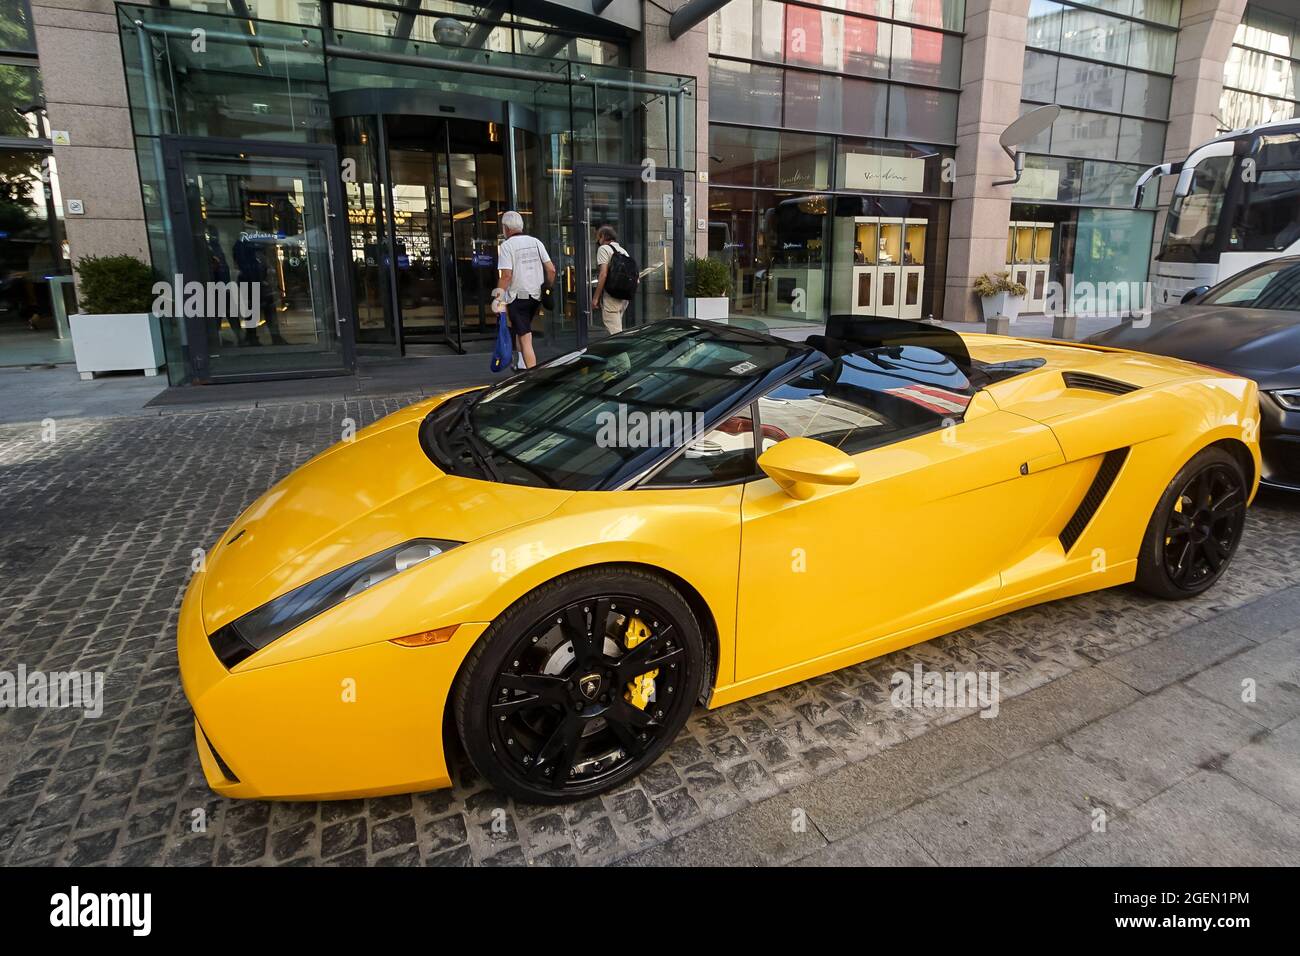 Bucharest, Romania - August 17, 2021: An yellow 2006 Lamborghini Gallardo  Spyder is parked in front of the entrance to the Radisson Blu Hotel  Buchares Stock Photo - Alamy